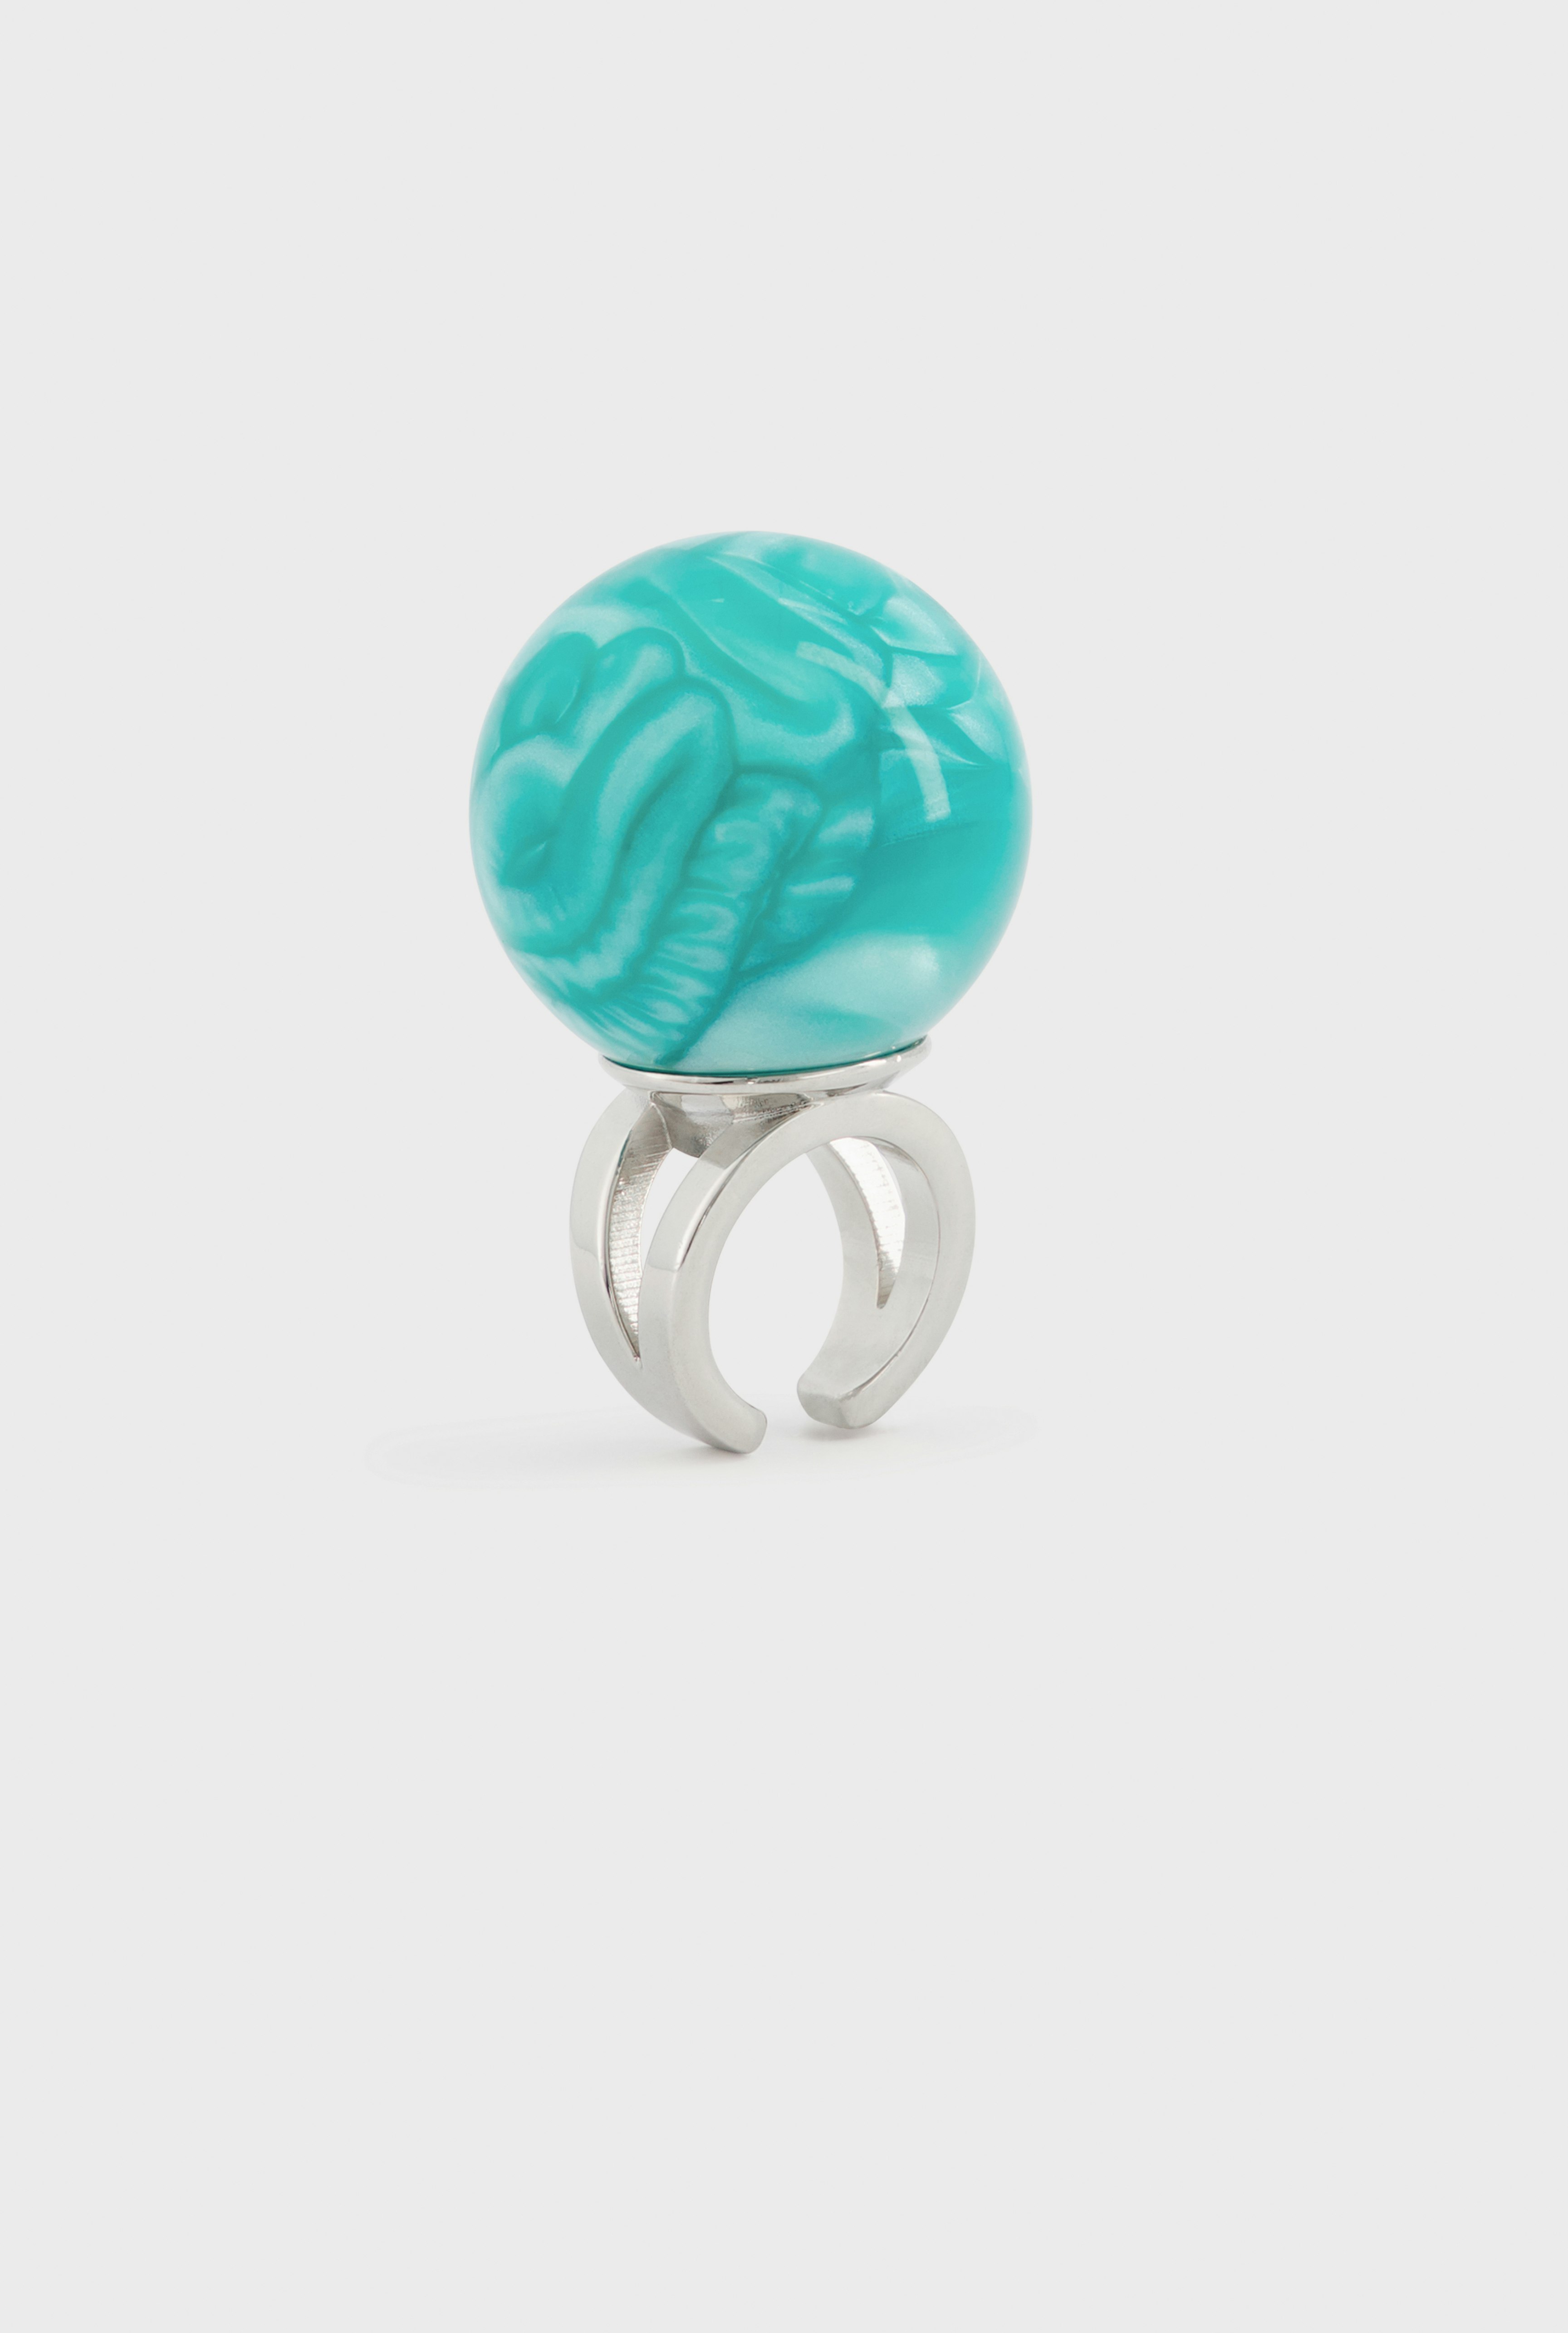 The Turquoise Cyber Ball Ring